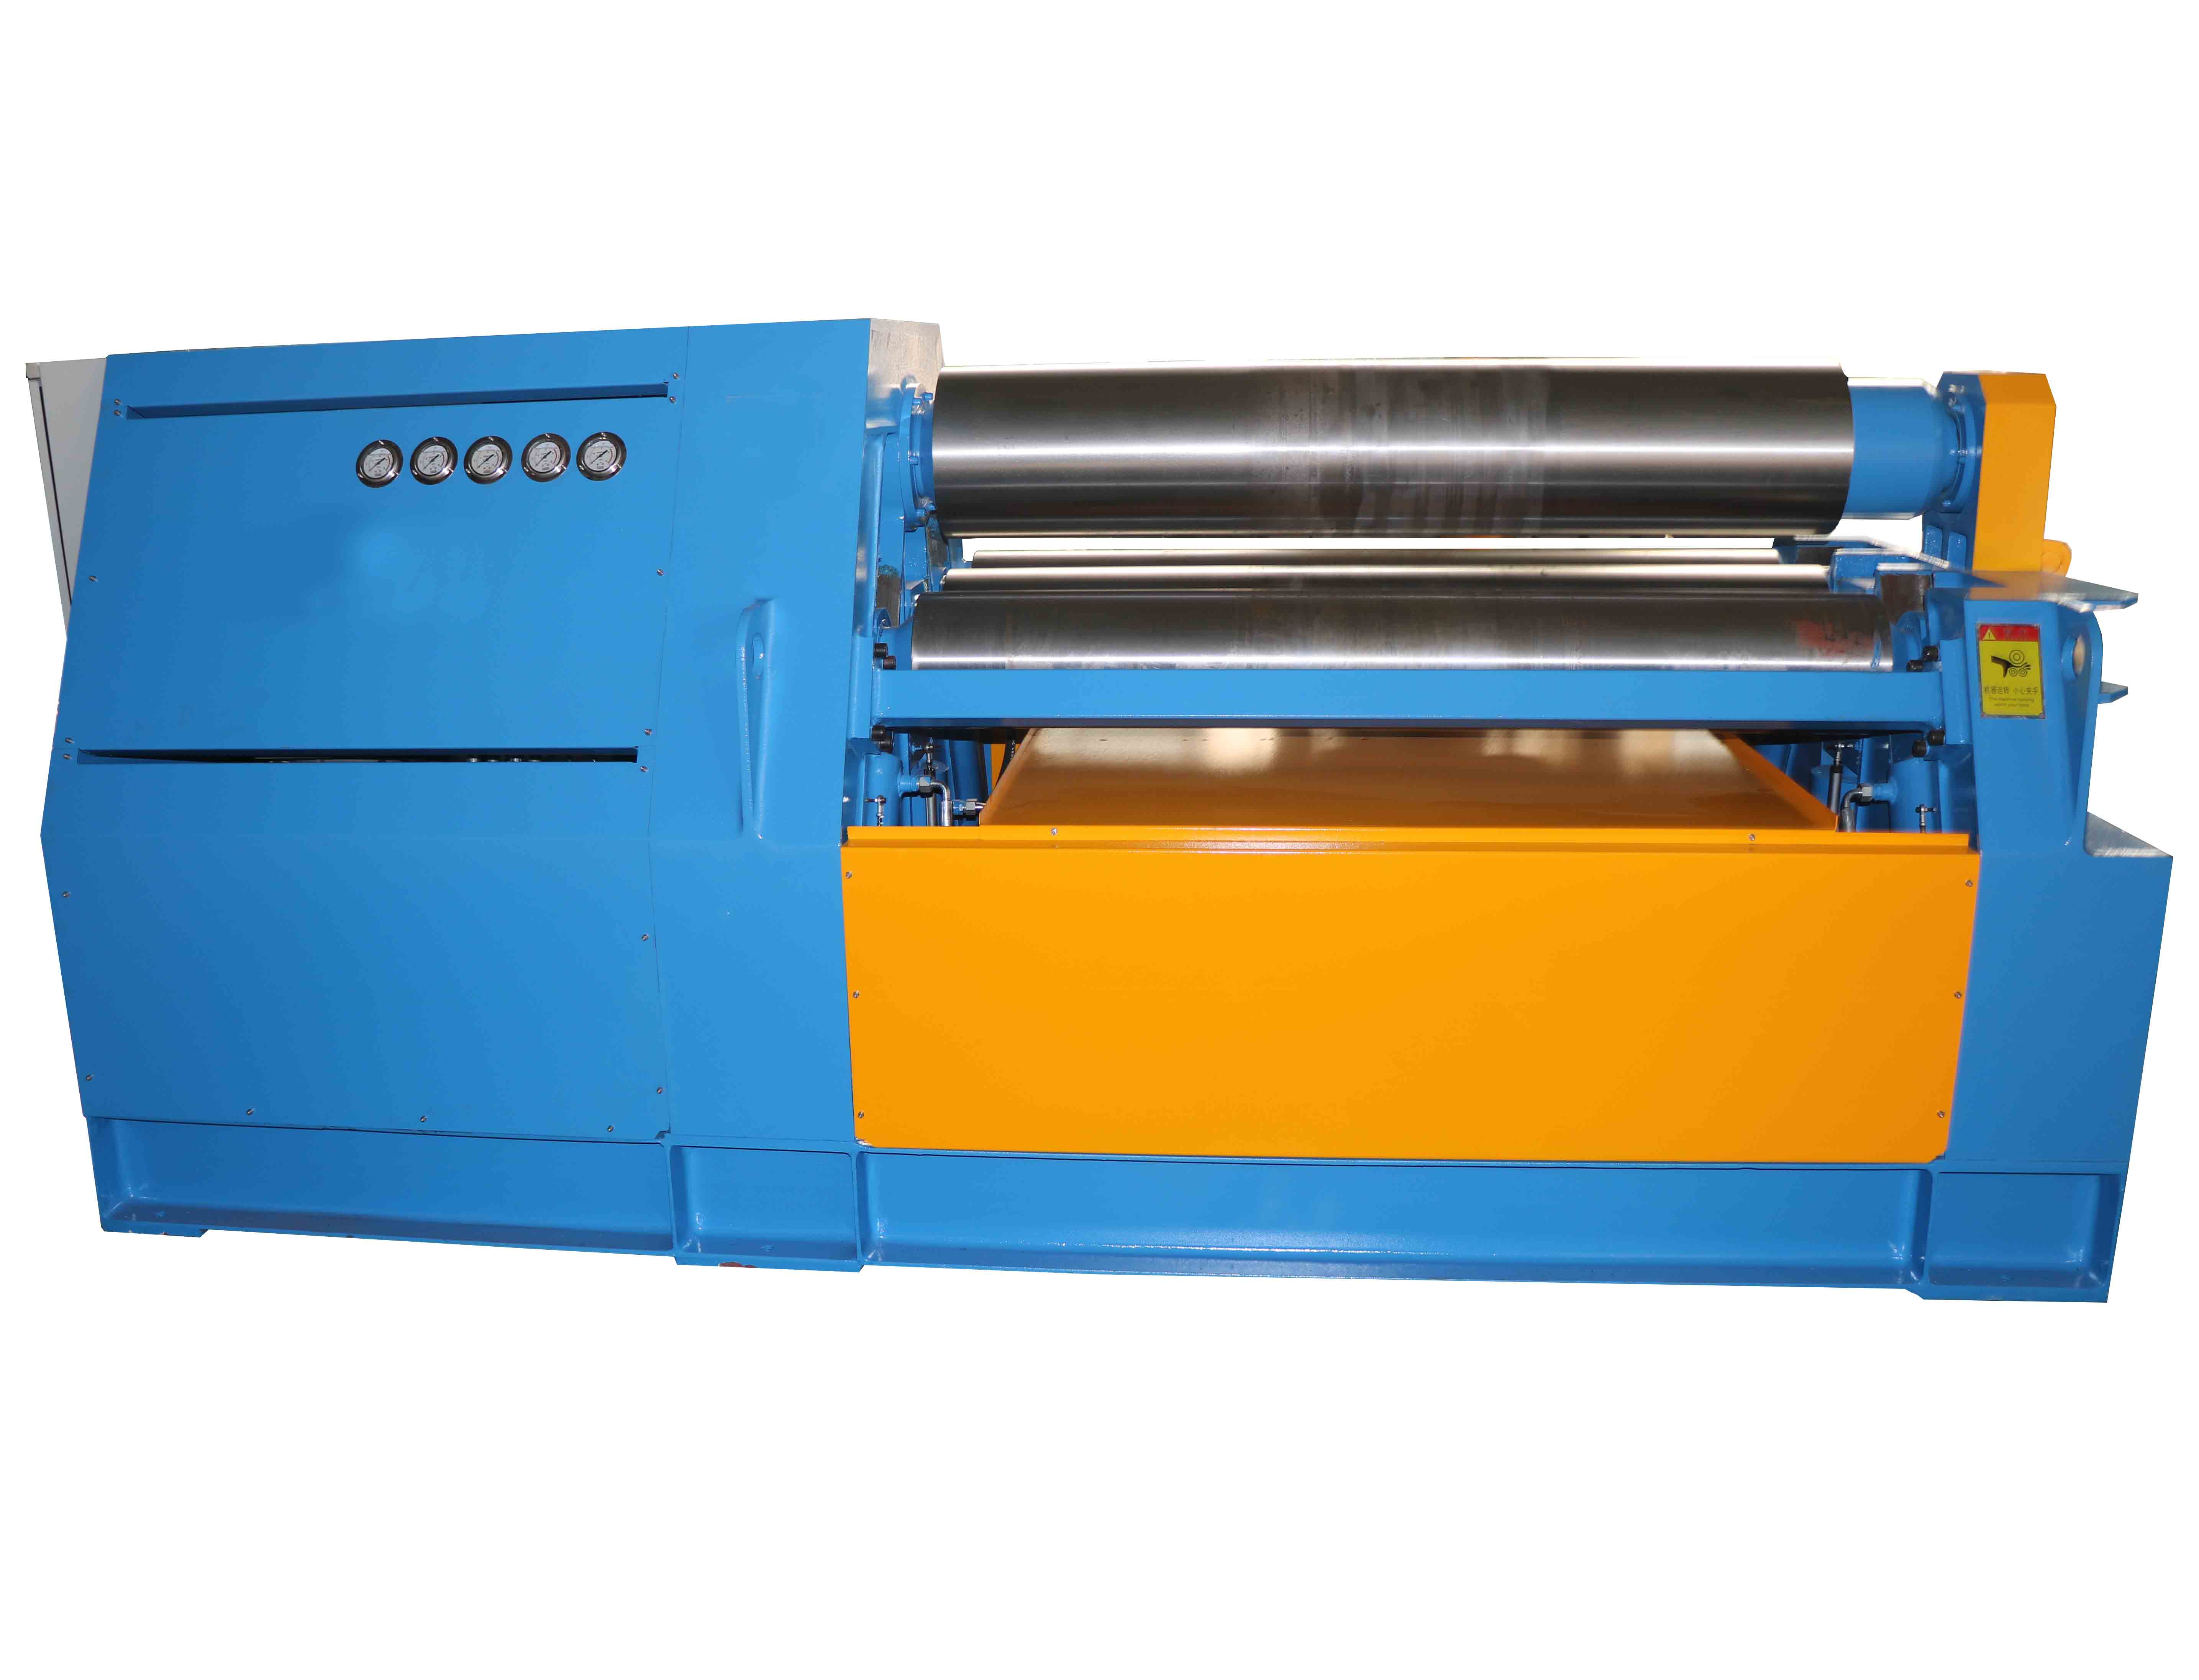 25x1500 four rollers plate bending machine